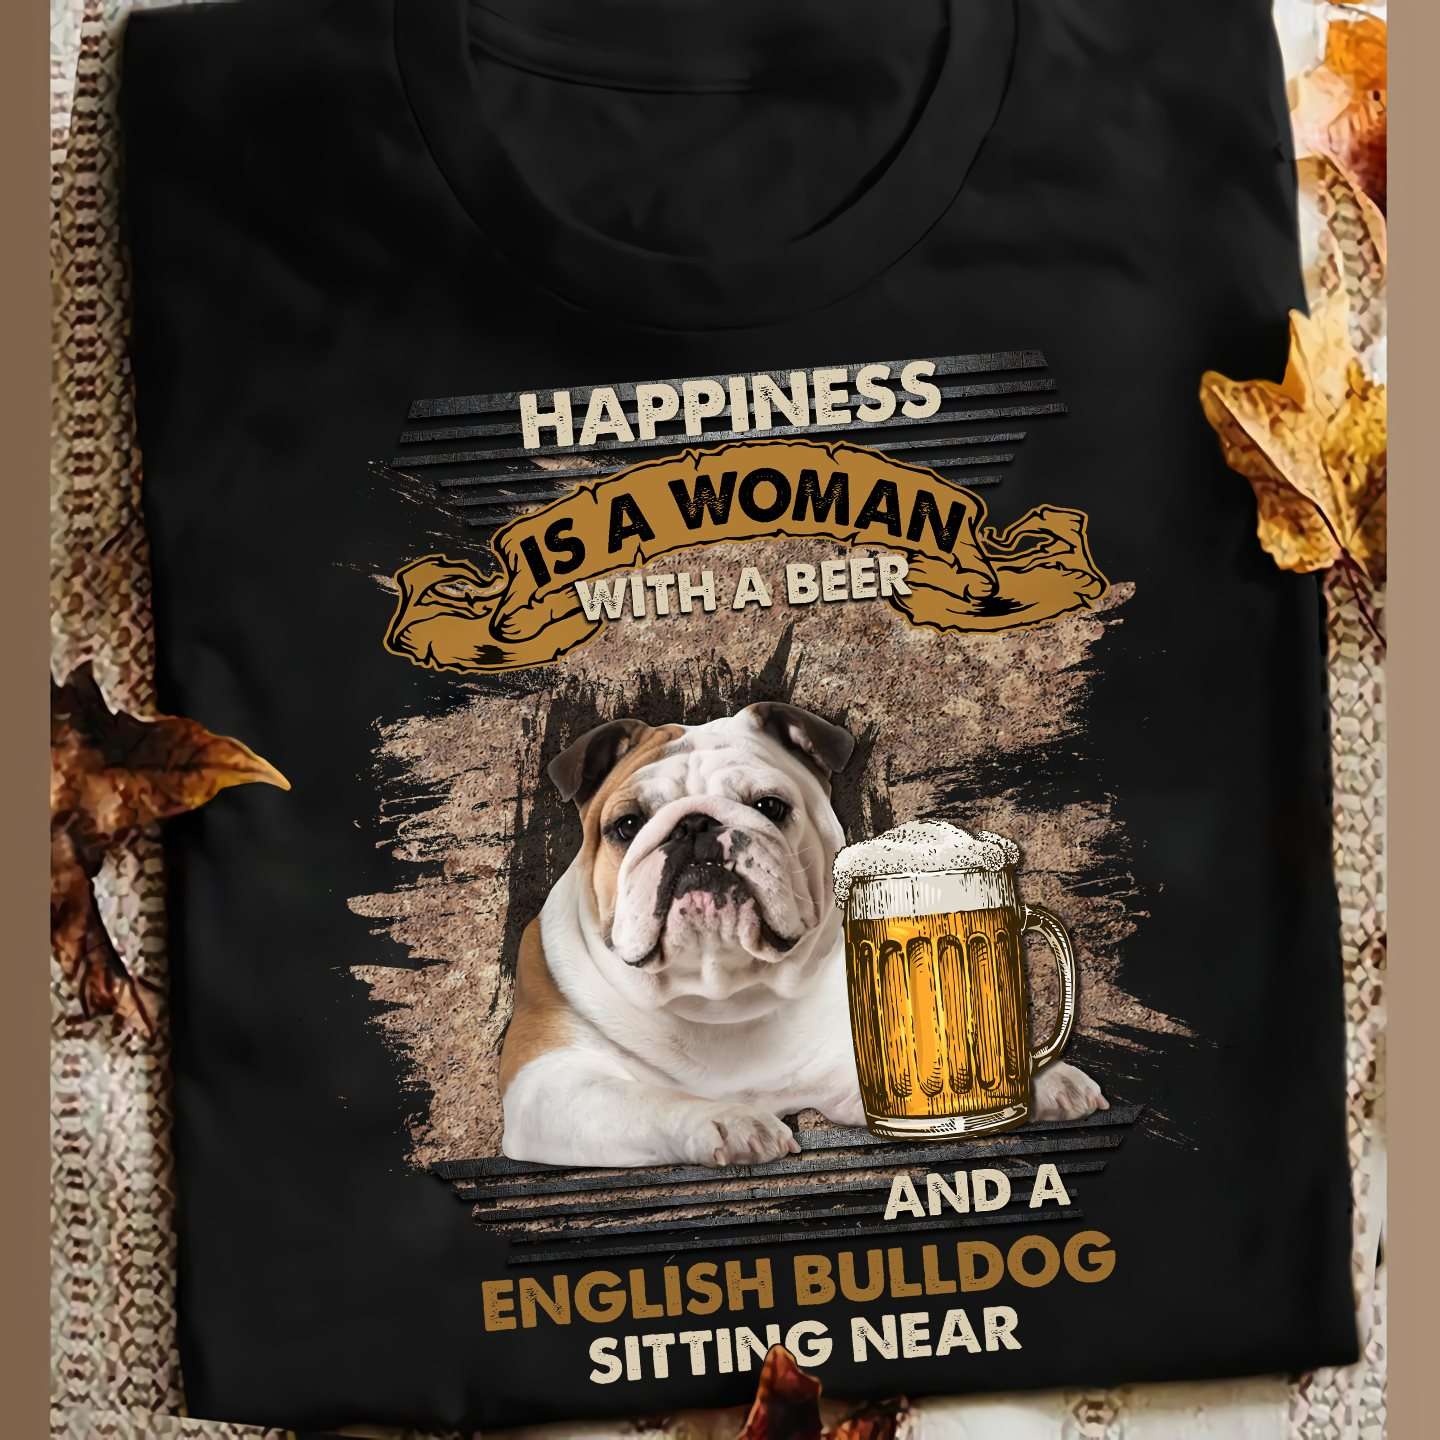 English Bulldog Beer - Happiness is a woman with a beer and a english bulldog sitting near